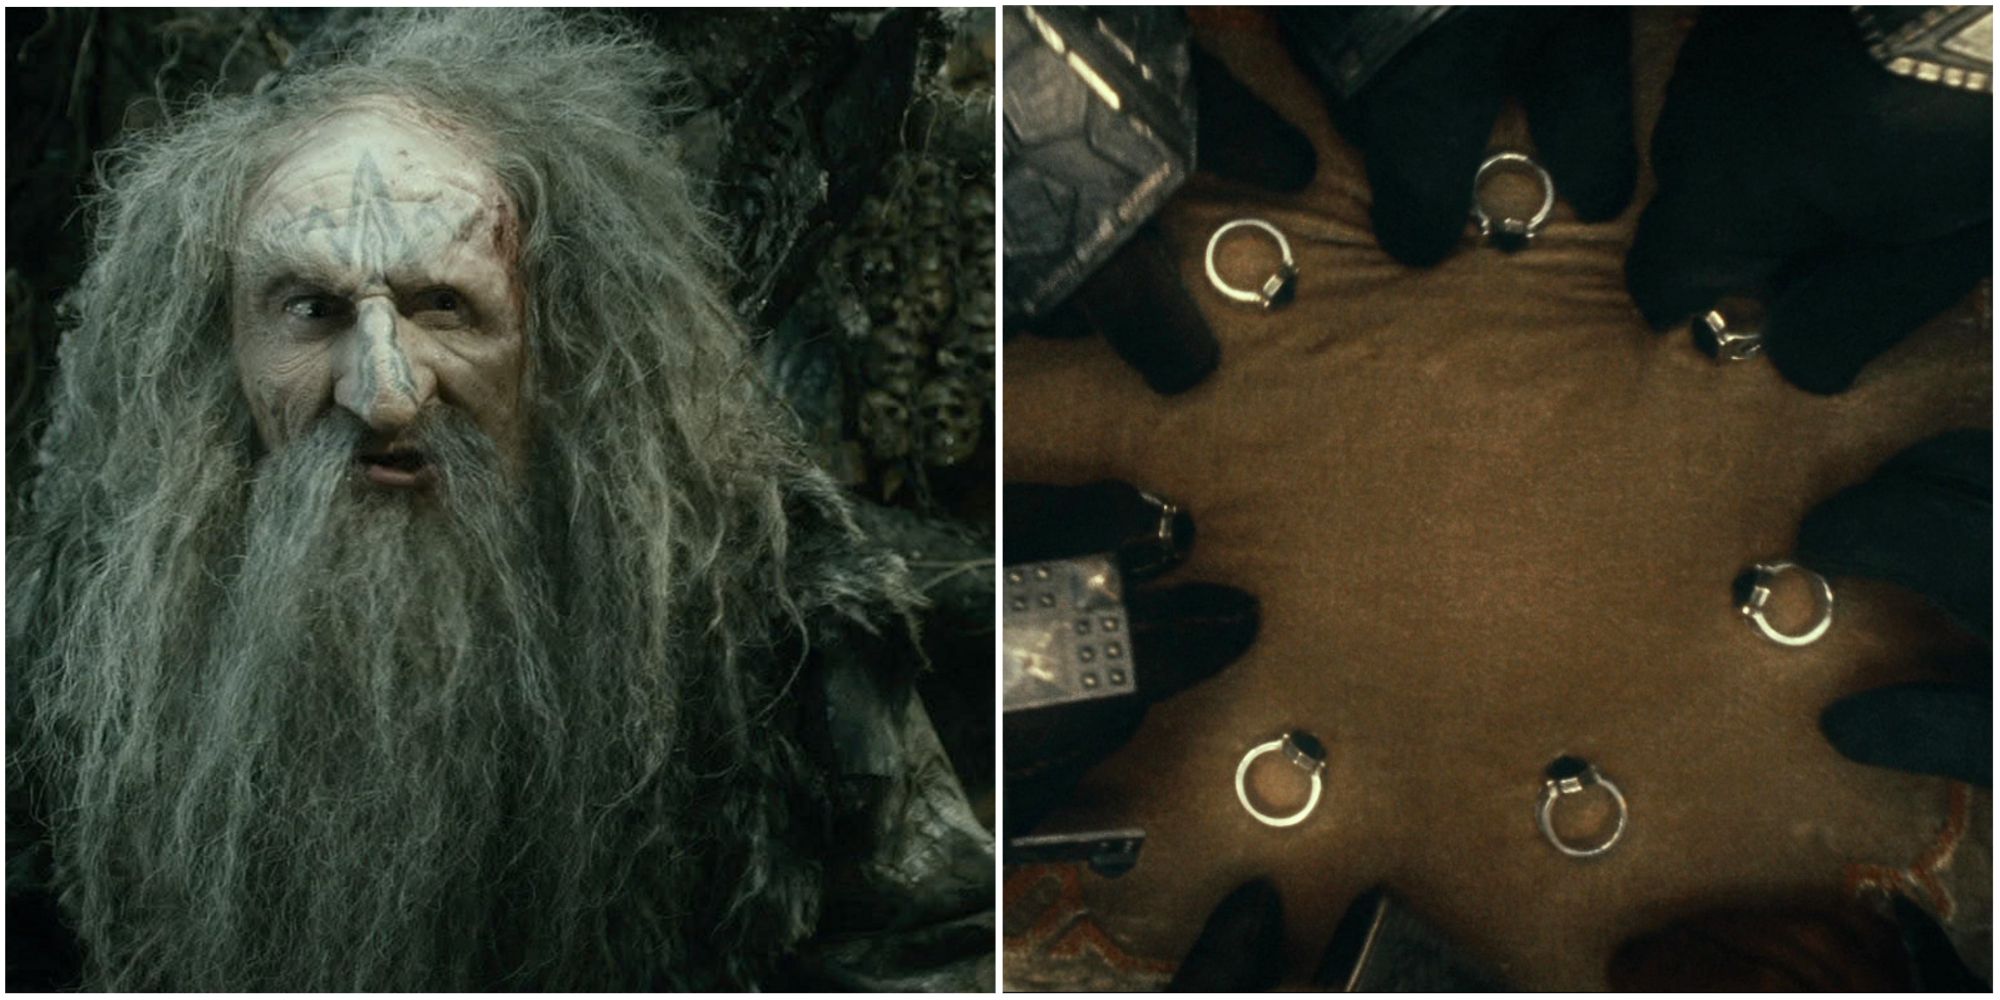 Thrain in The Hobbit: The Battle of the Five Armies and the Rings in The Lord of the Rings: Fellowship of the Ring